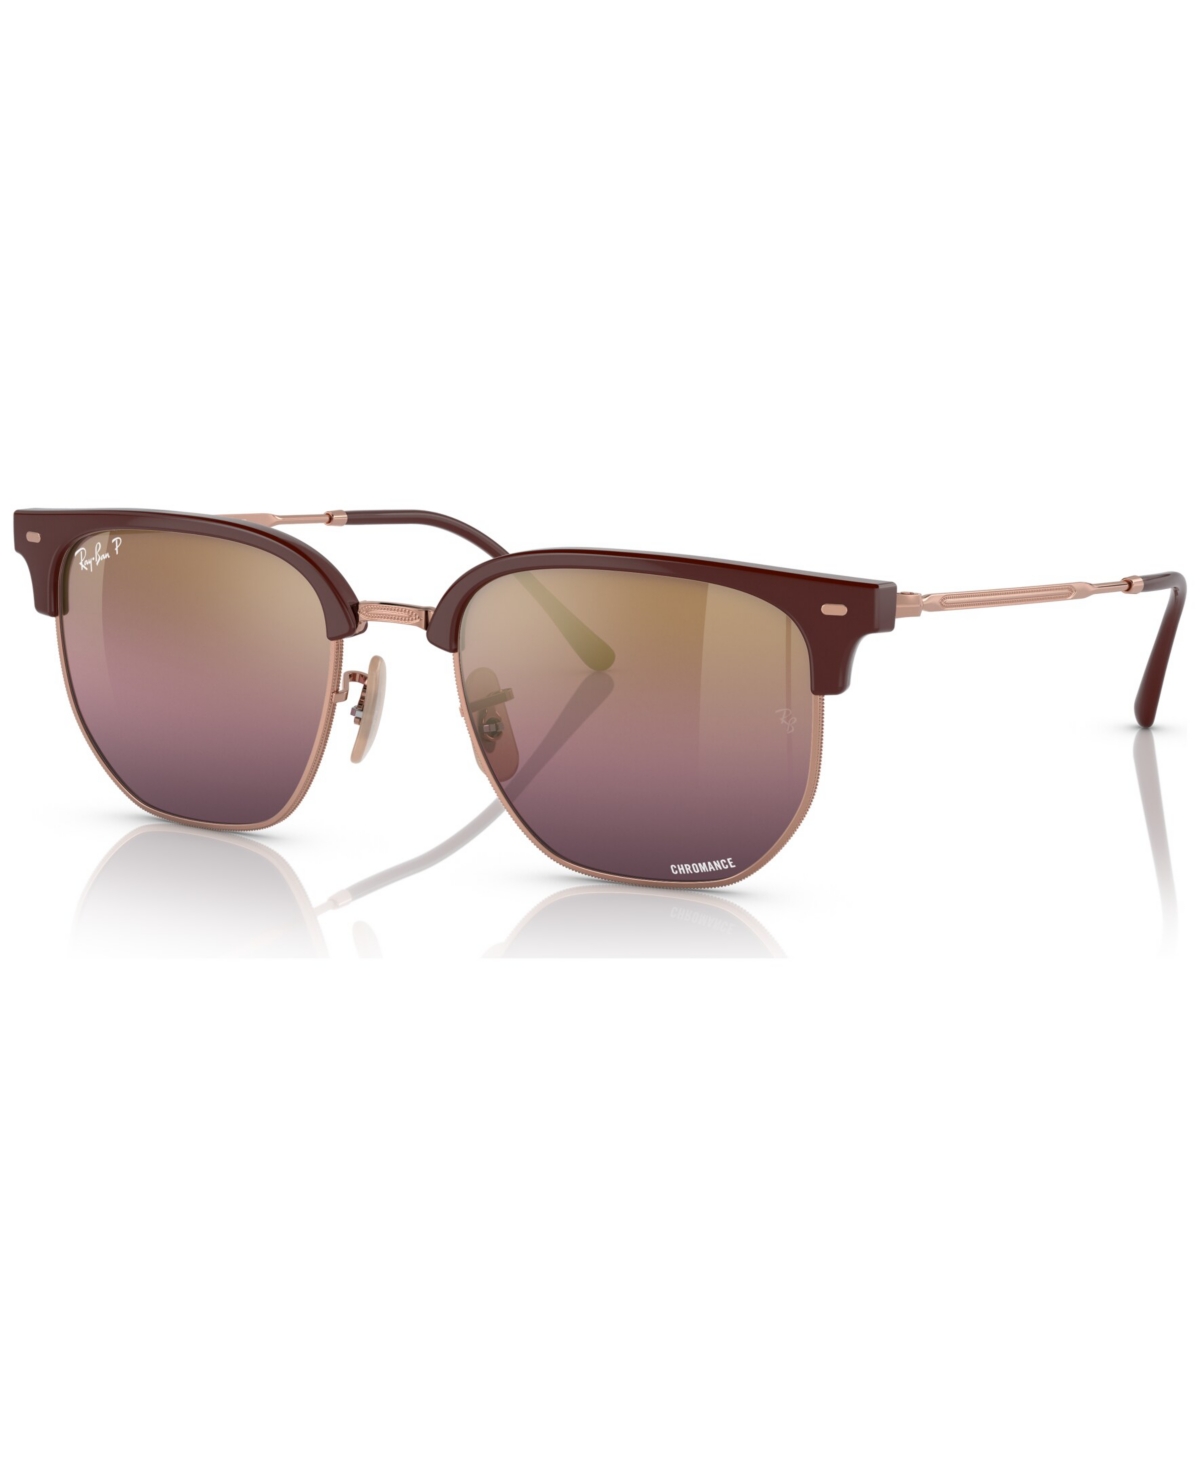 Shop Ray Ban New Clubmaster Polarized Sunglasses, Rb4416 In Bordeaux On Rose Gold-tone